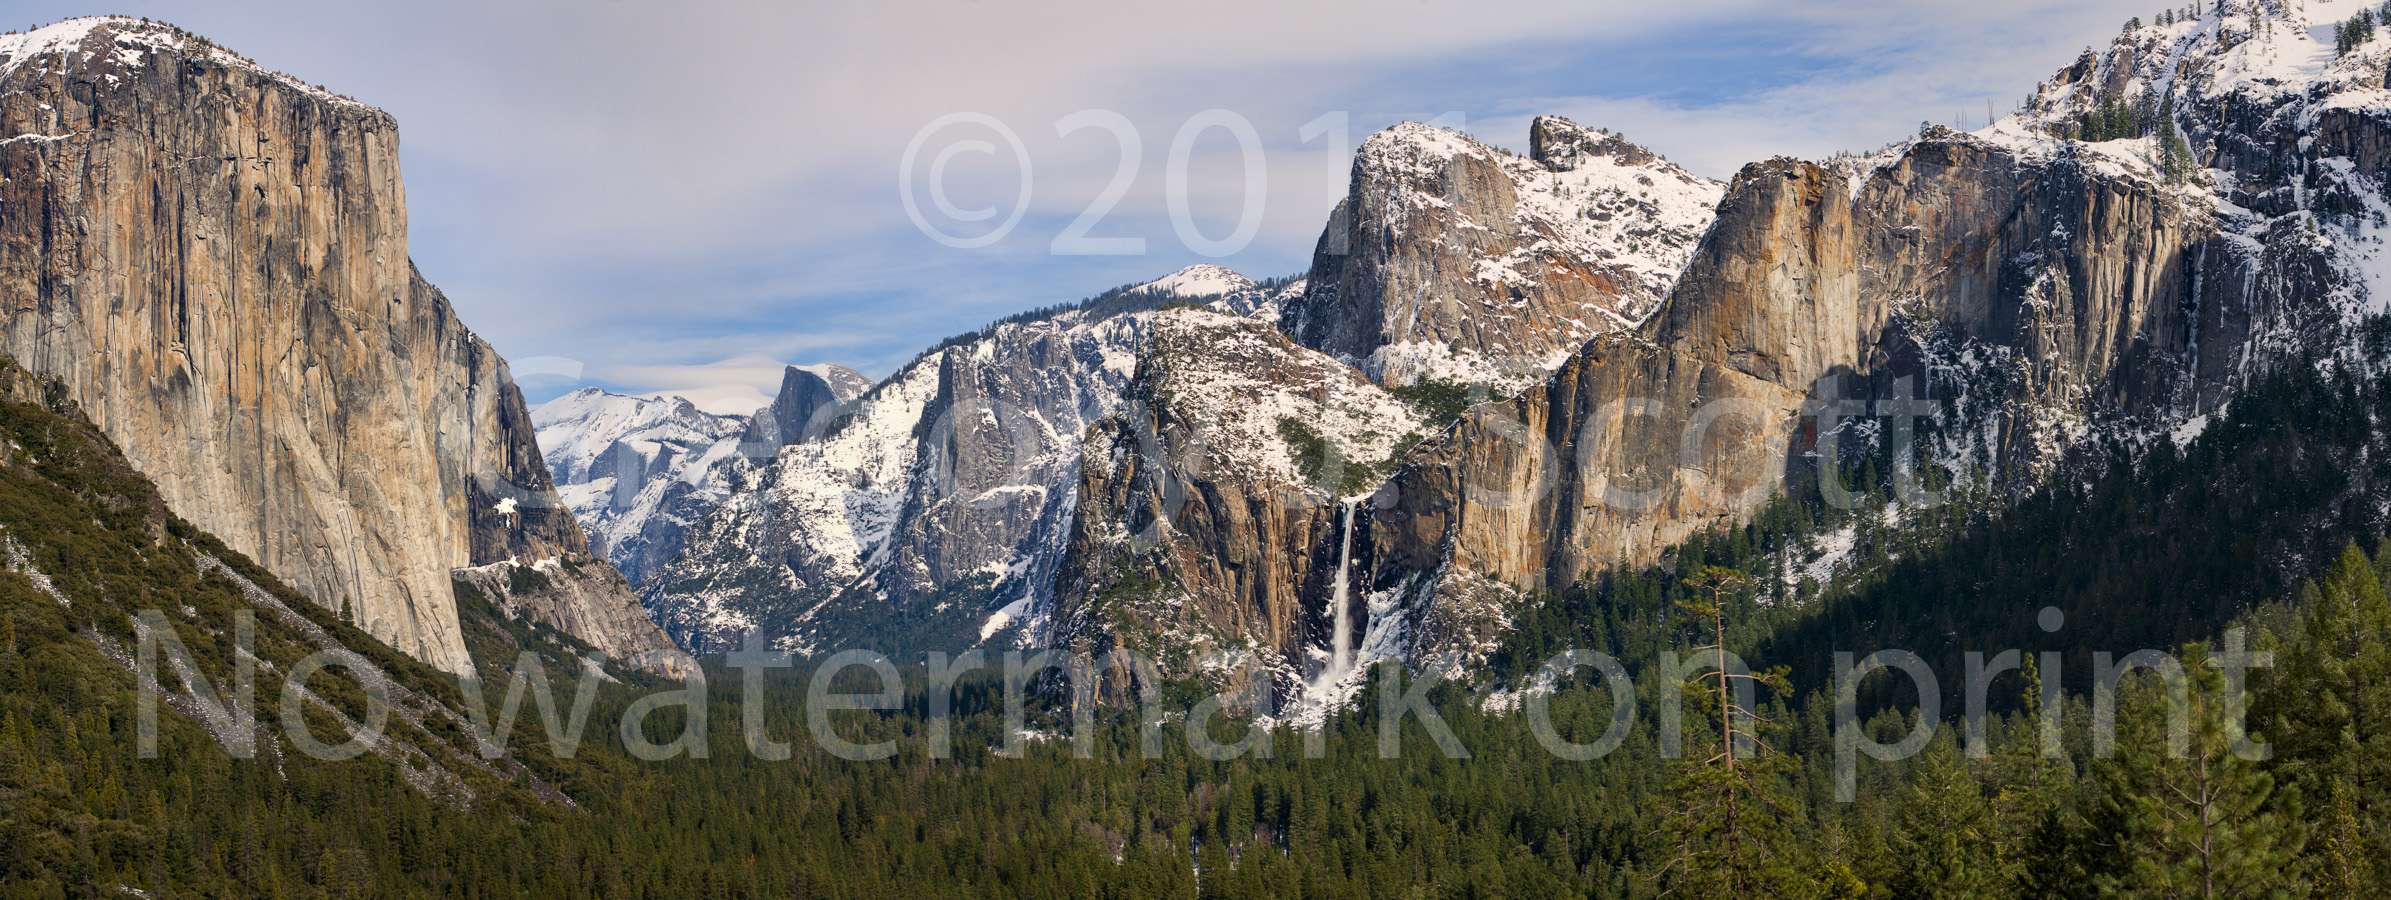 Photograph of Yosemite Valley with Snow, Photographed March 1, 2011